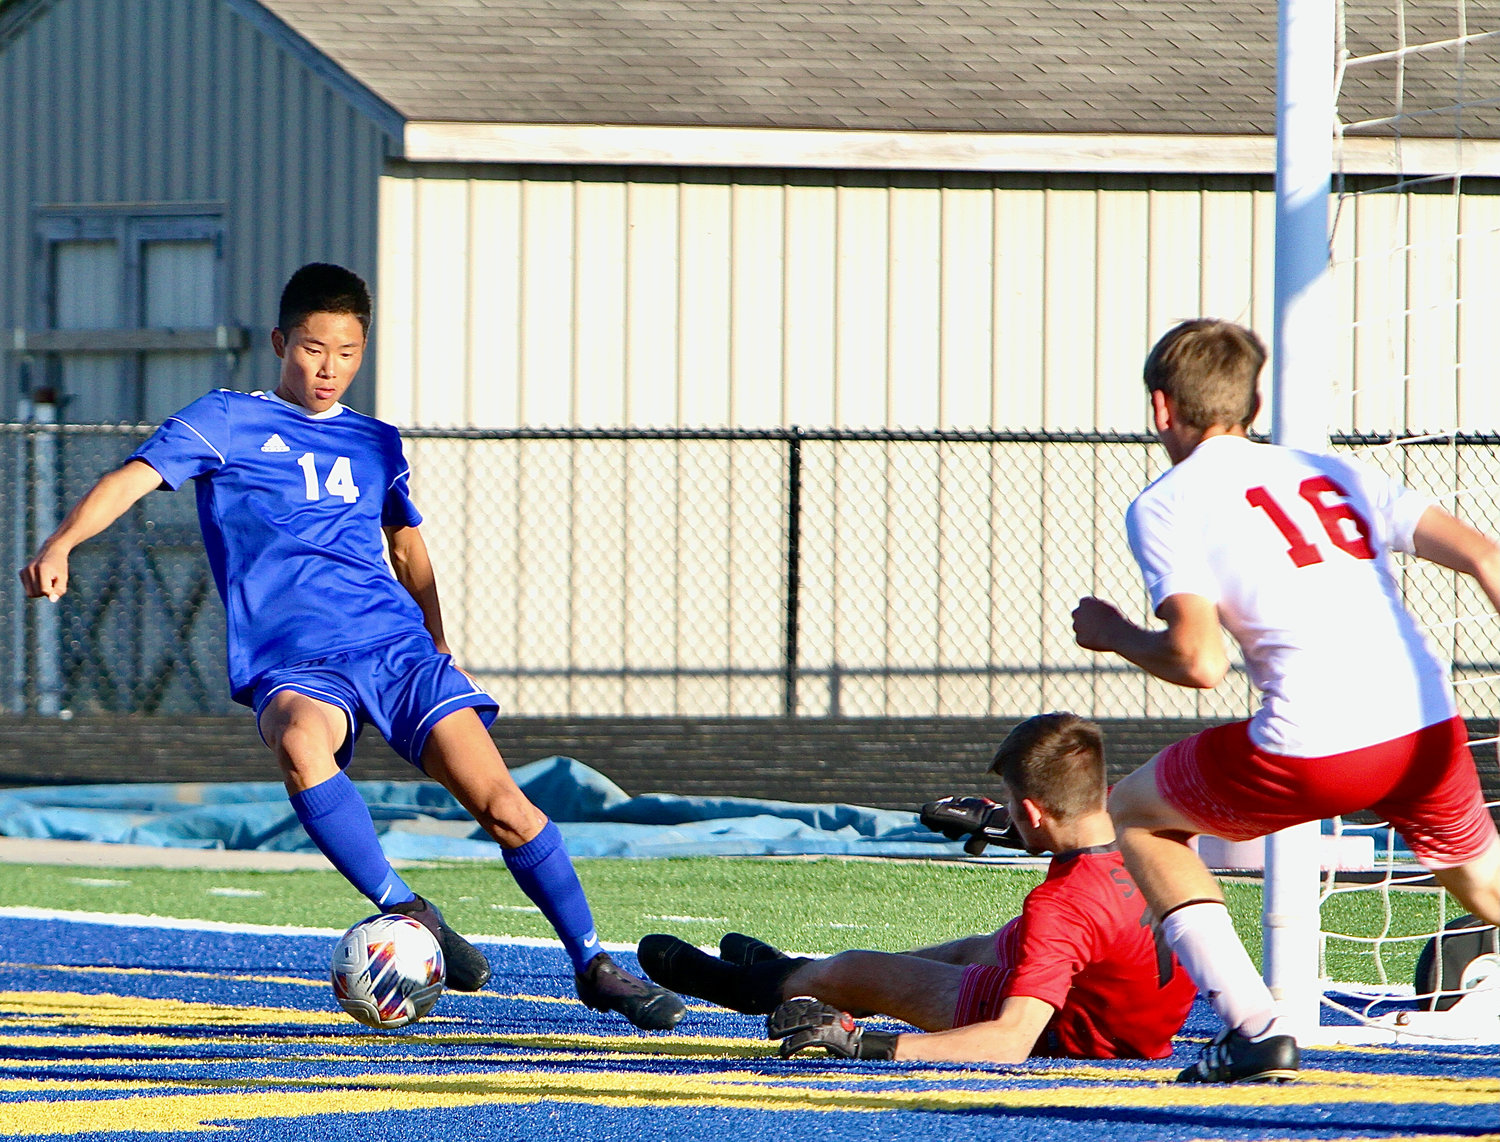 Crawfordsville’s Ryo Nishina had two goals and an assist to help the Athenians down county rival Southmont 8-0 in the Class 2A Sectional 25 opener.